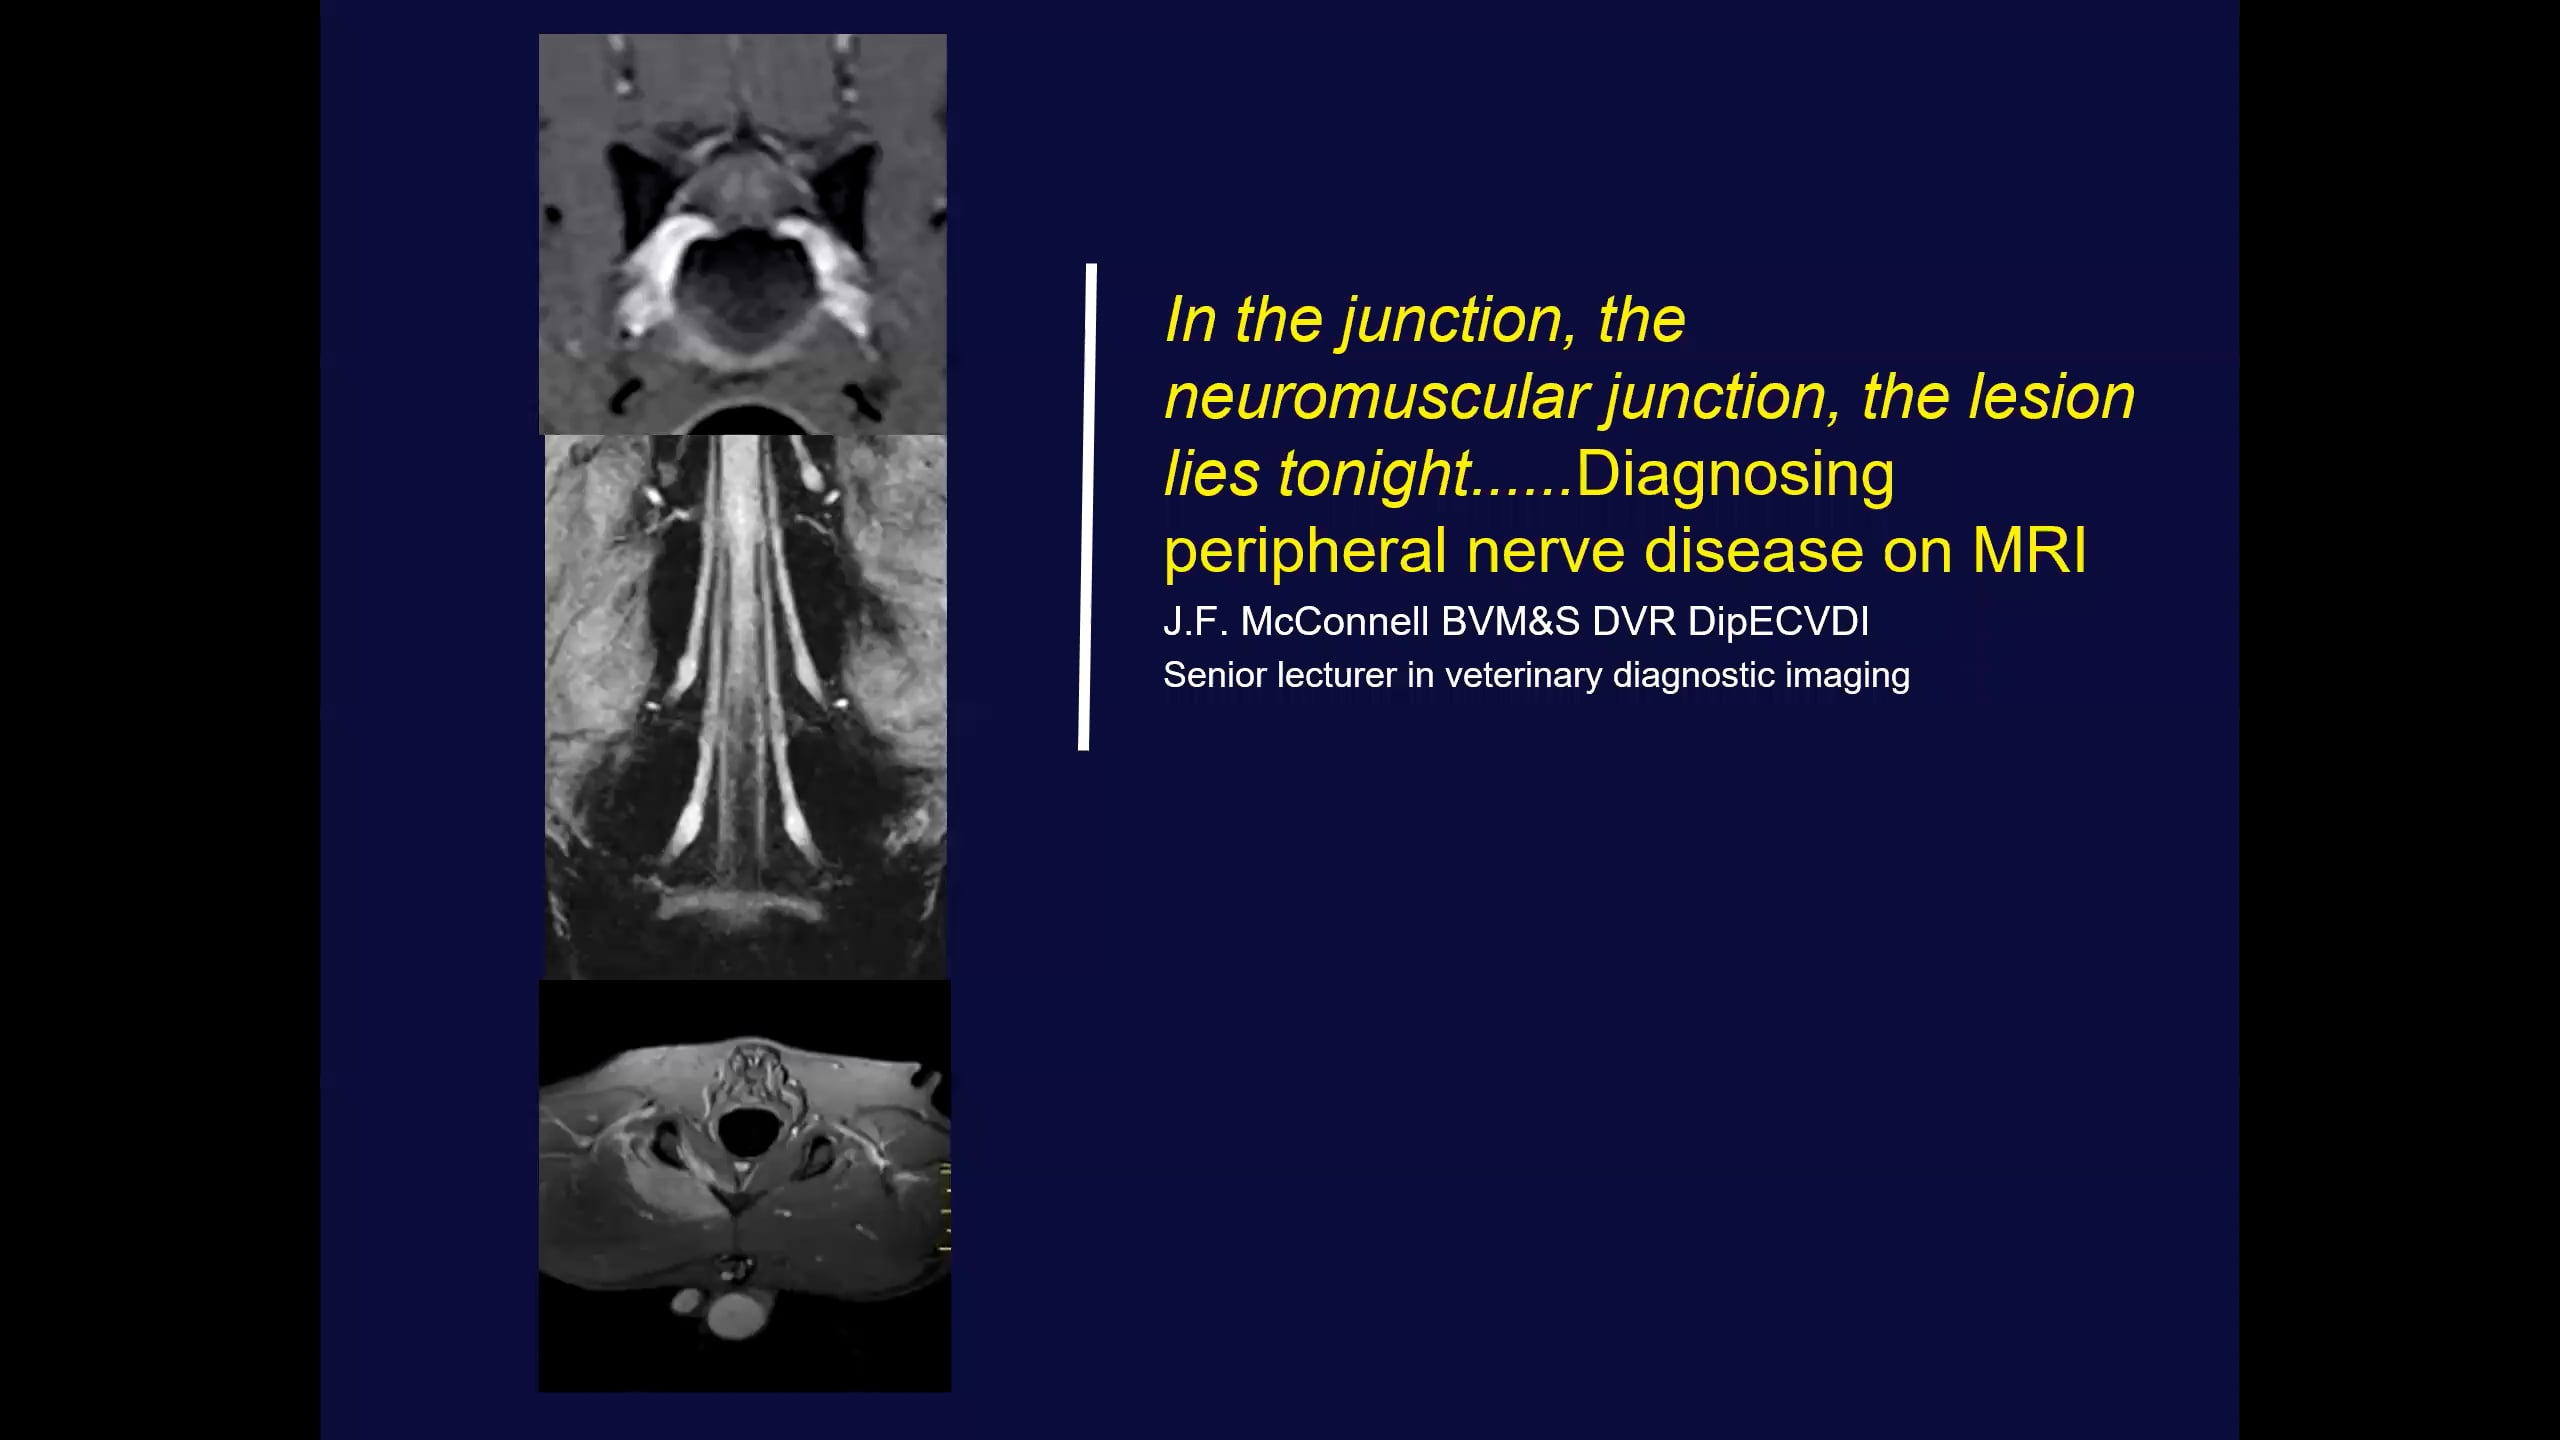 In the junction, the neuromuscular junction, the lesion lies tonight......Diagnosing peripheral nerve disease on MRI